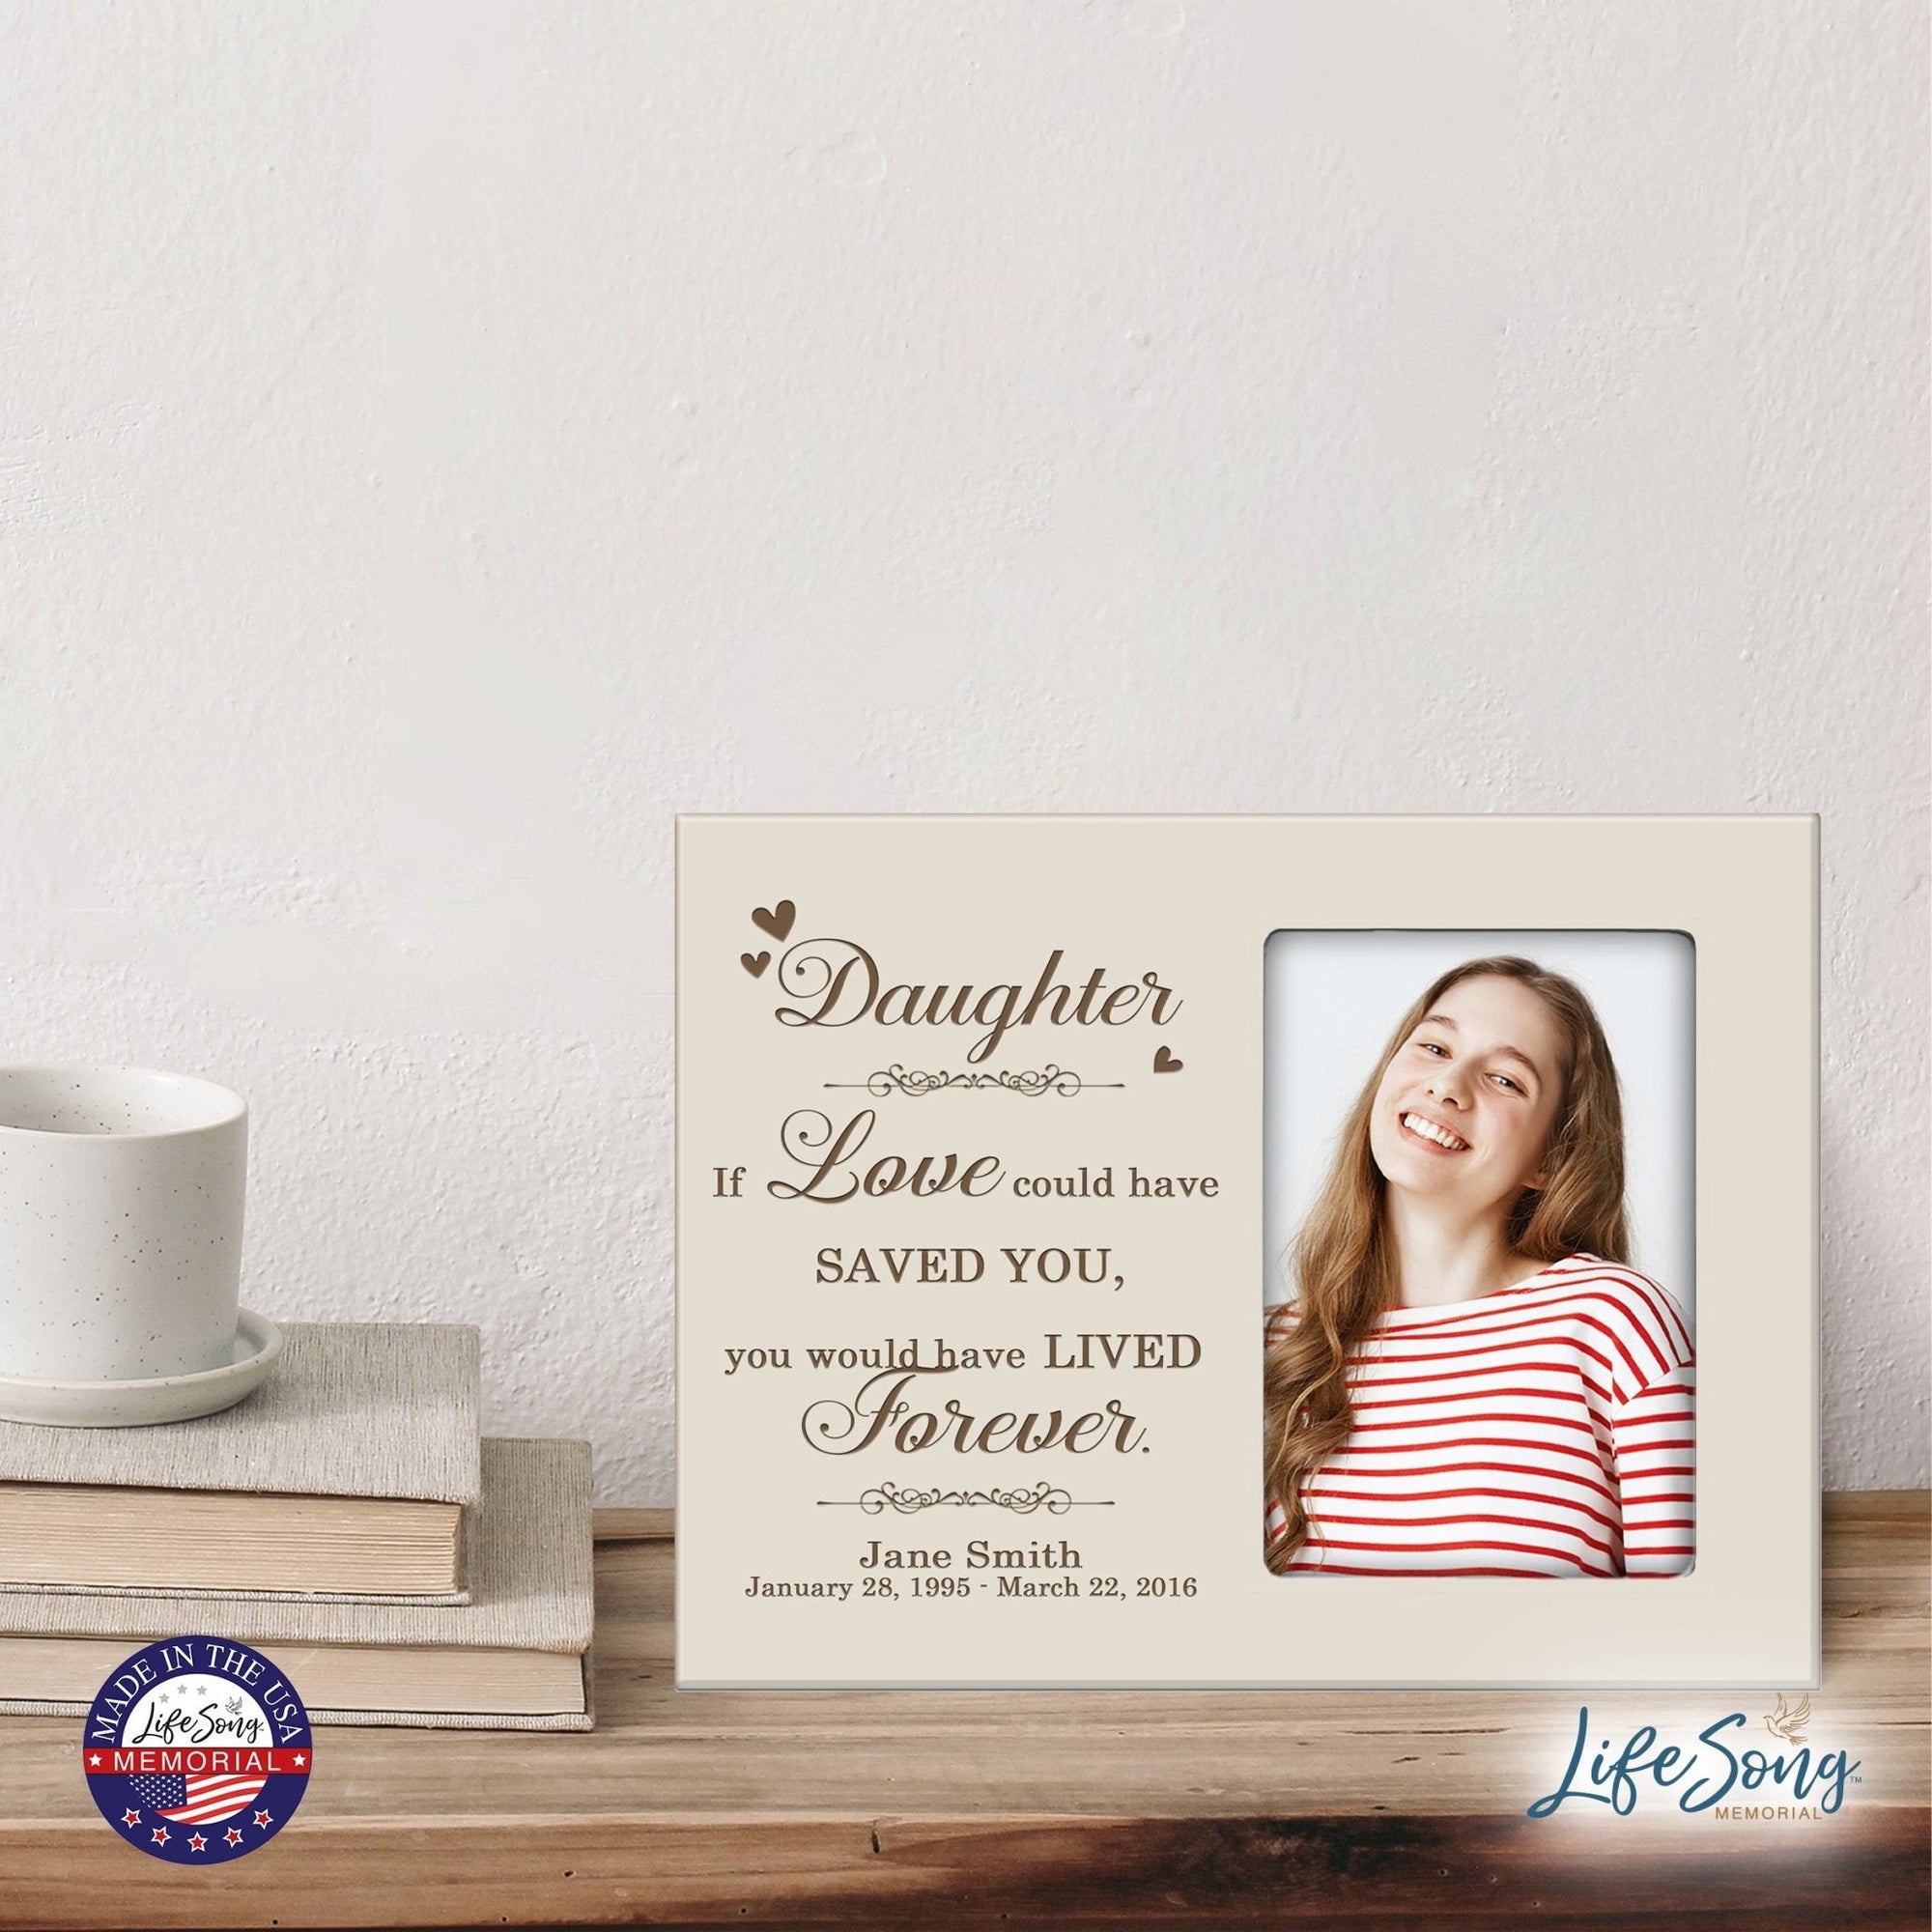 Personalized Horizontal 8x10 Wooden Memorial Picture Frame Holds 4x6 Photo - Daughter, If Love Could - LifeSong Milestones